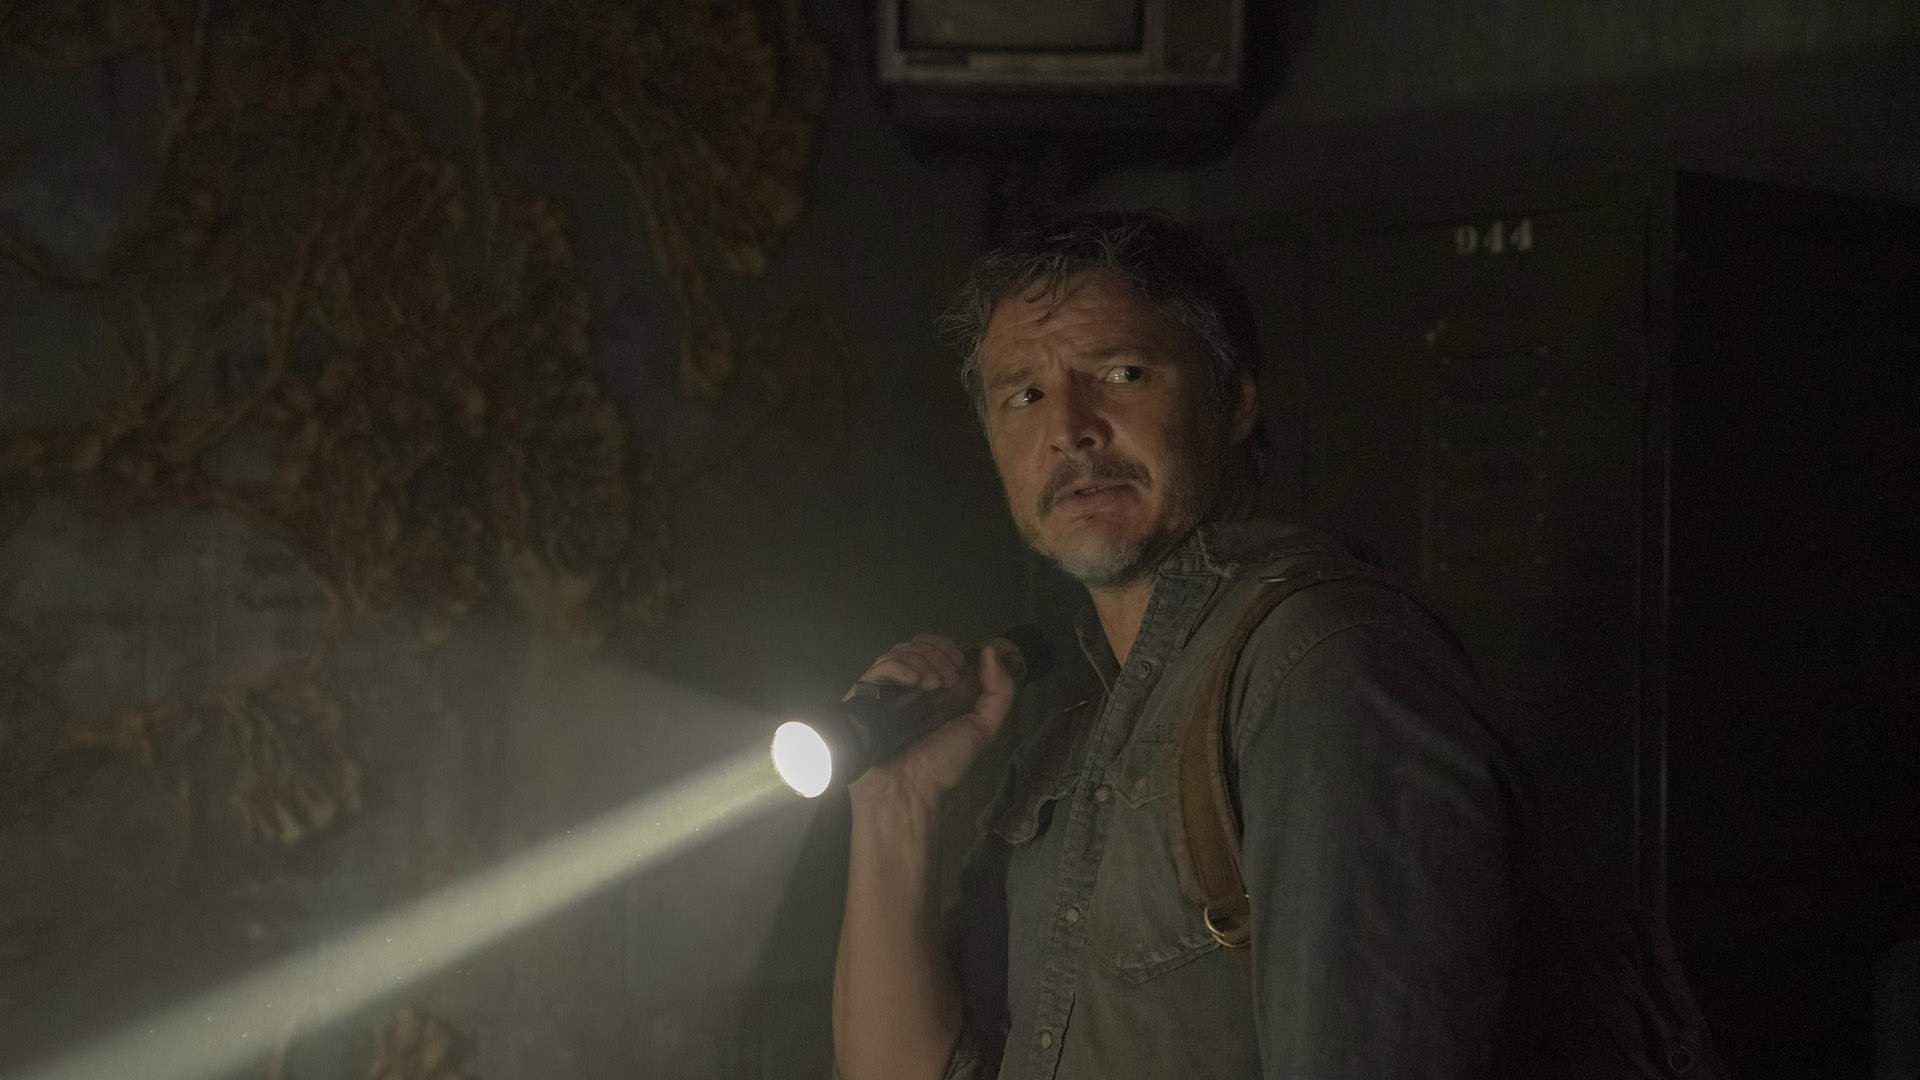 HBO's Full 'The Last of Us' Trailer Is Here with a Tense Pedro Pascal, Gun-Toting Nick Offerman and Monsters